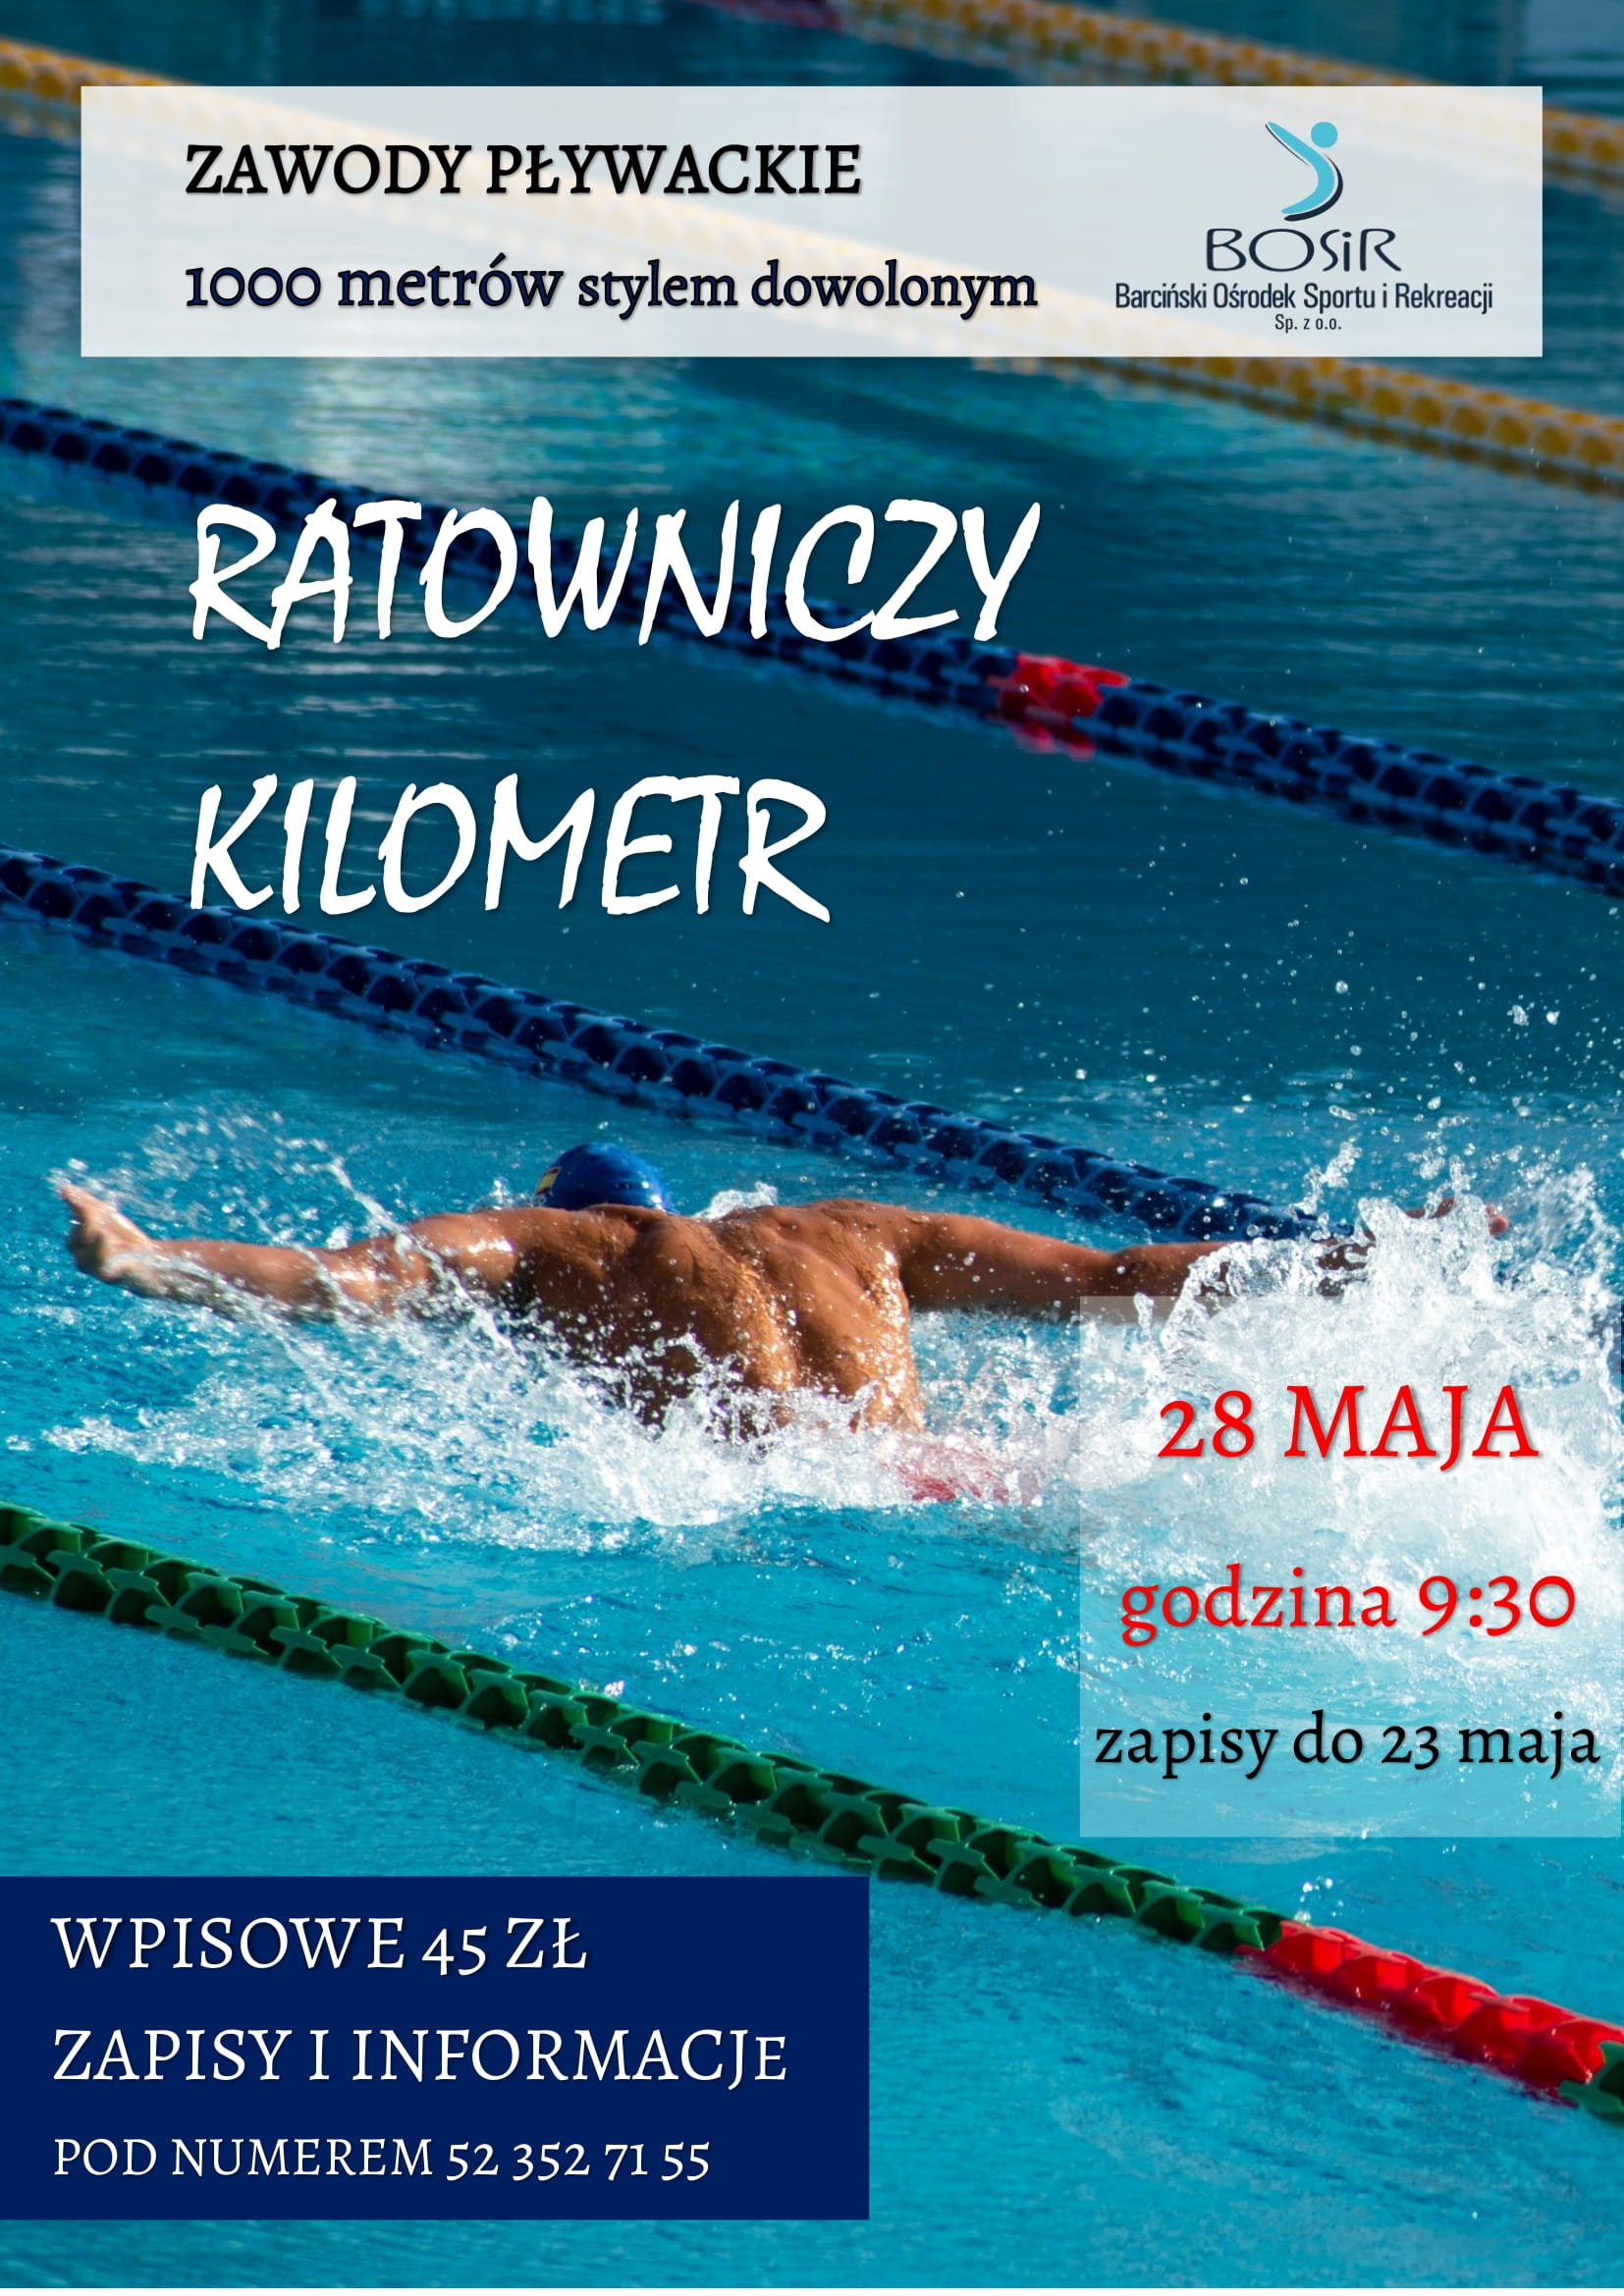 You are currently viewing Ratowniczy kilometr